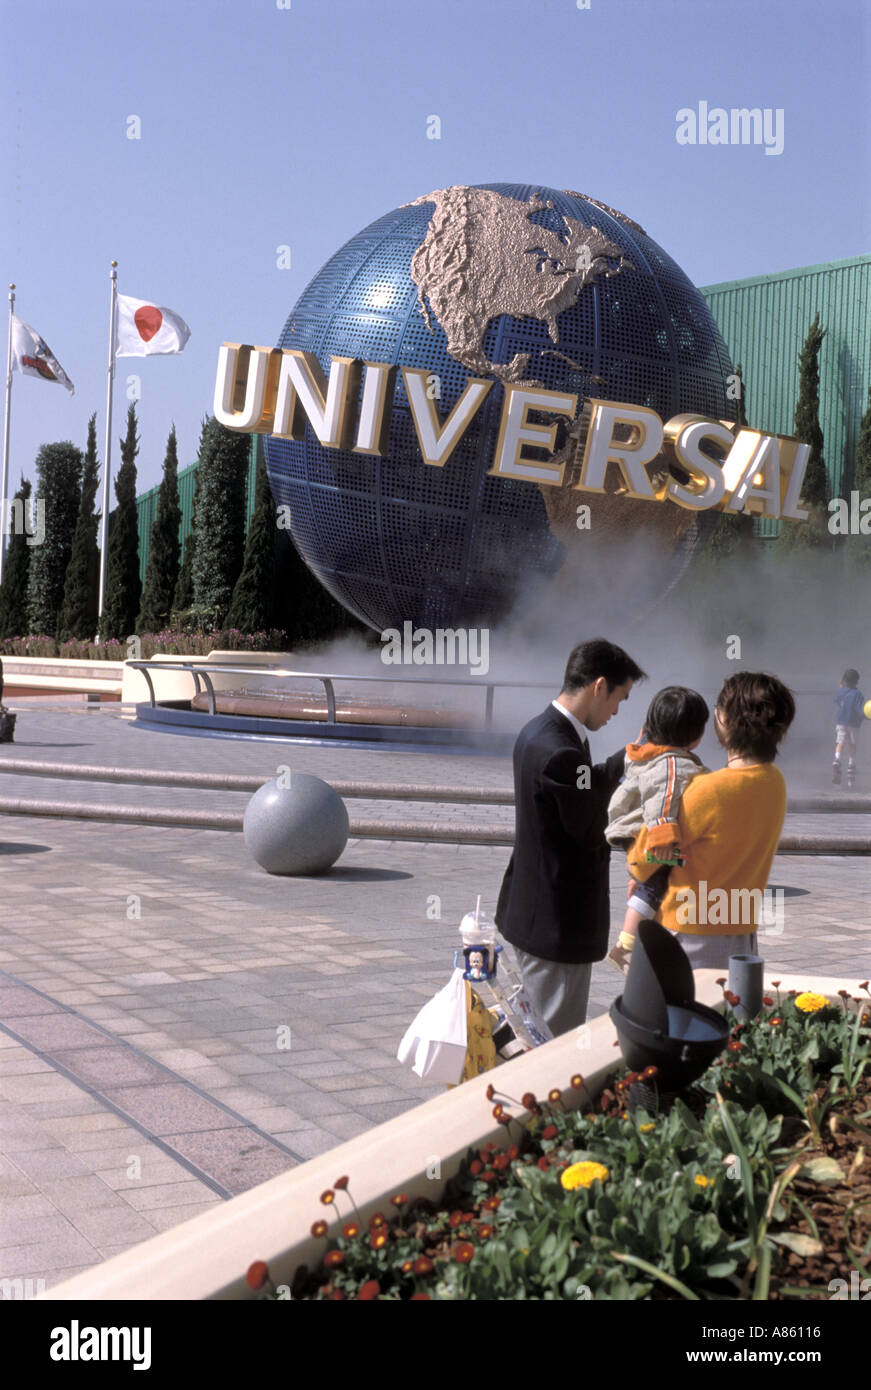 A family spends a day enjoying the sights at the Universal Studios Japan theme park in Osaka Stock Photo